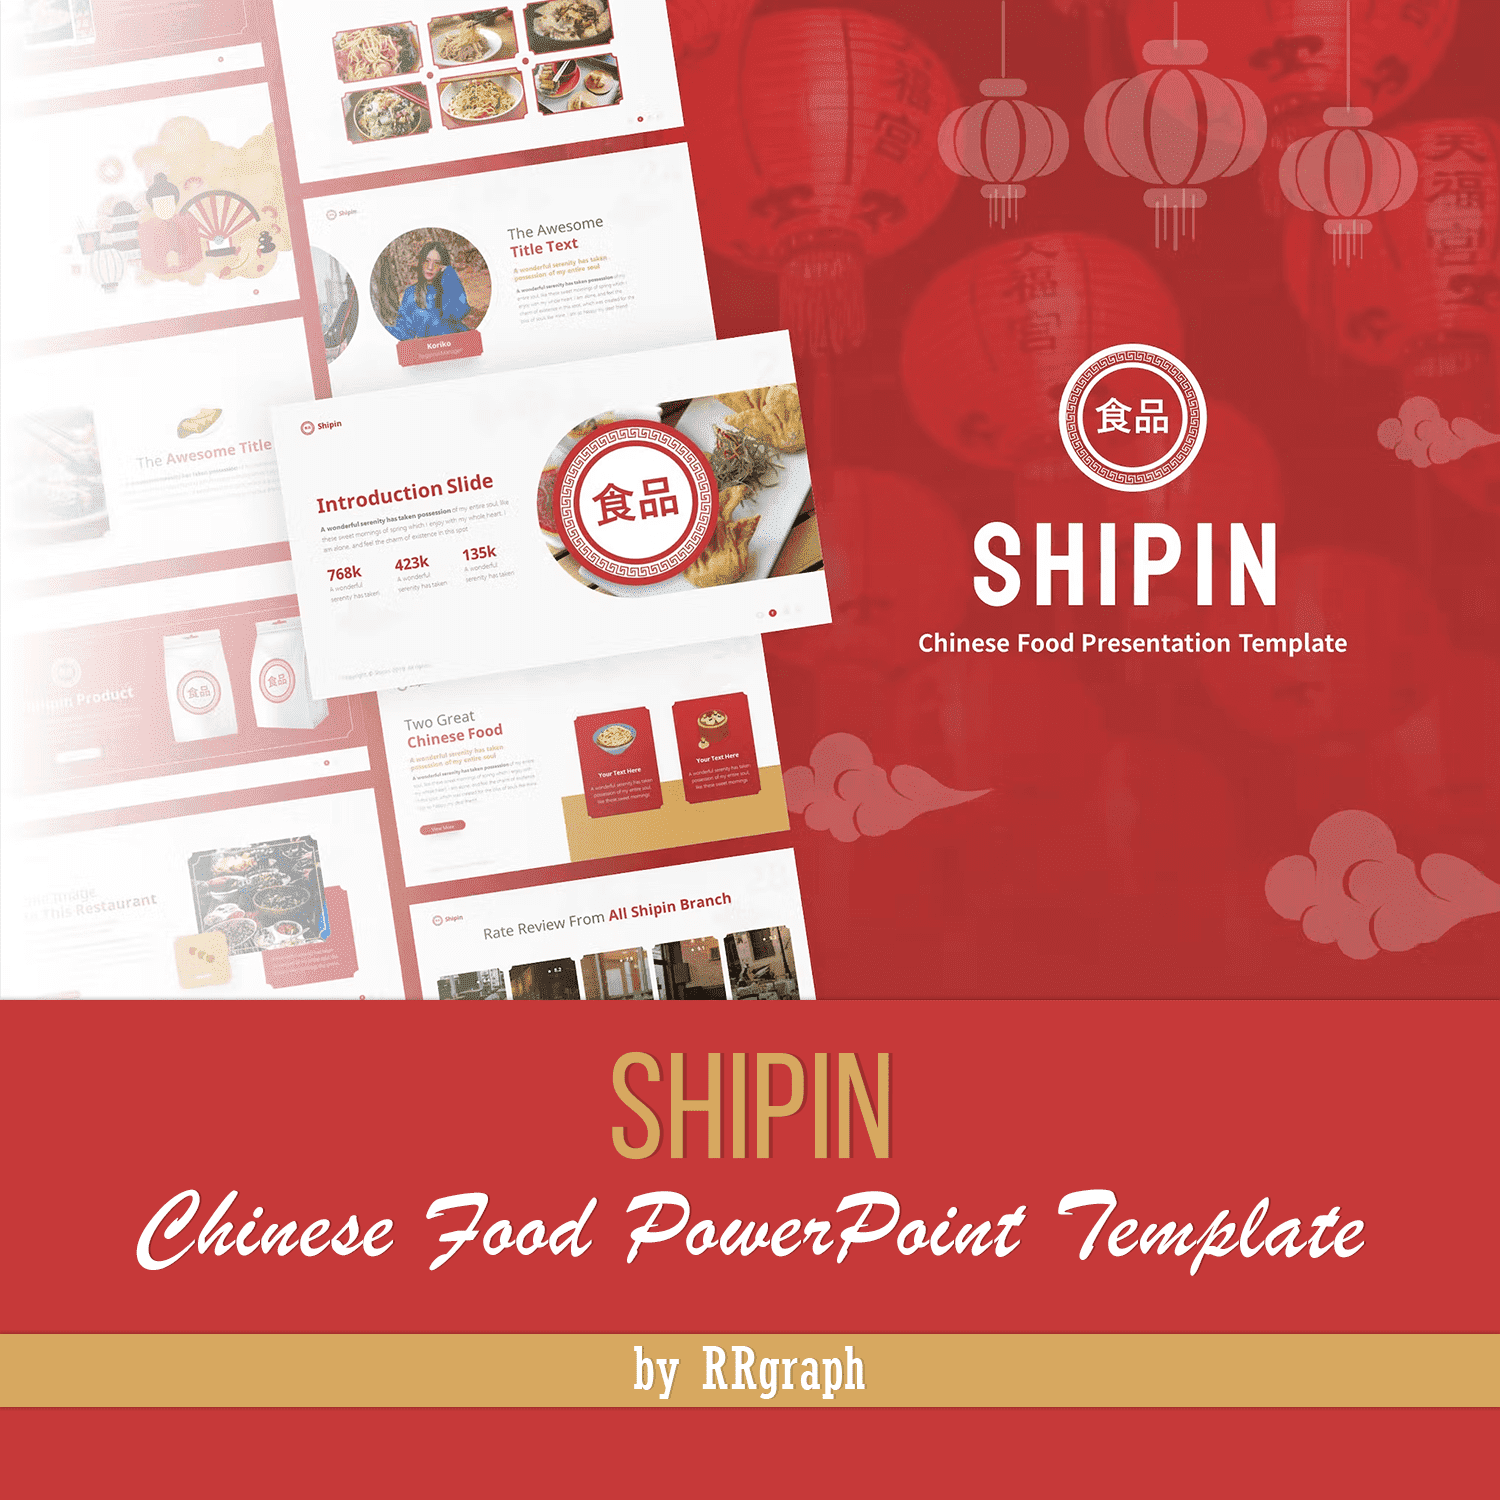 Shipin chinese food powerpoint template in red color.